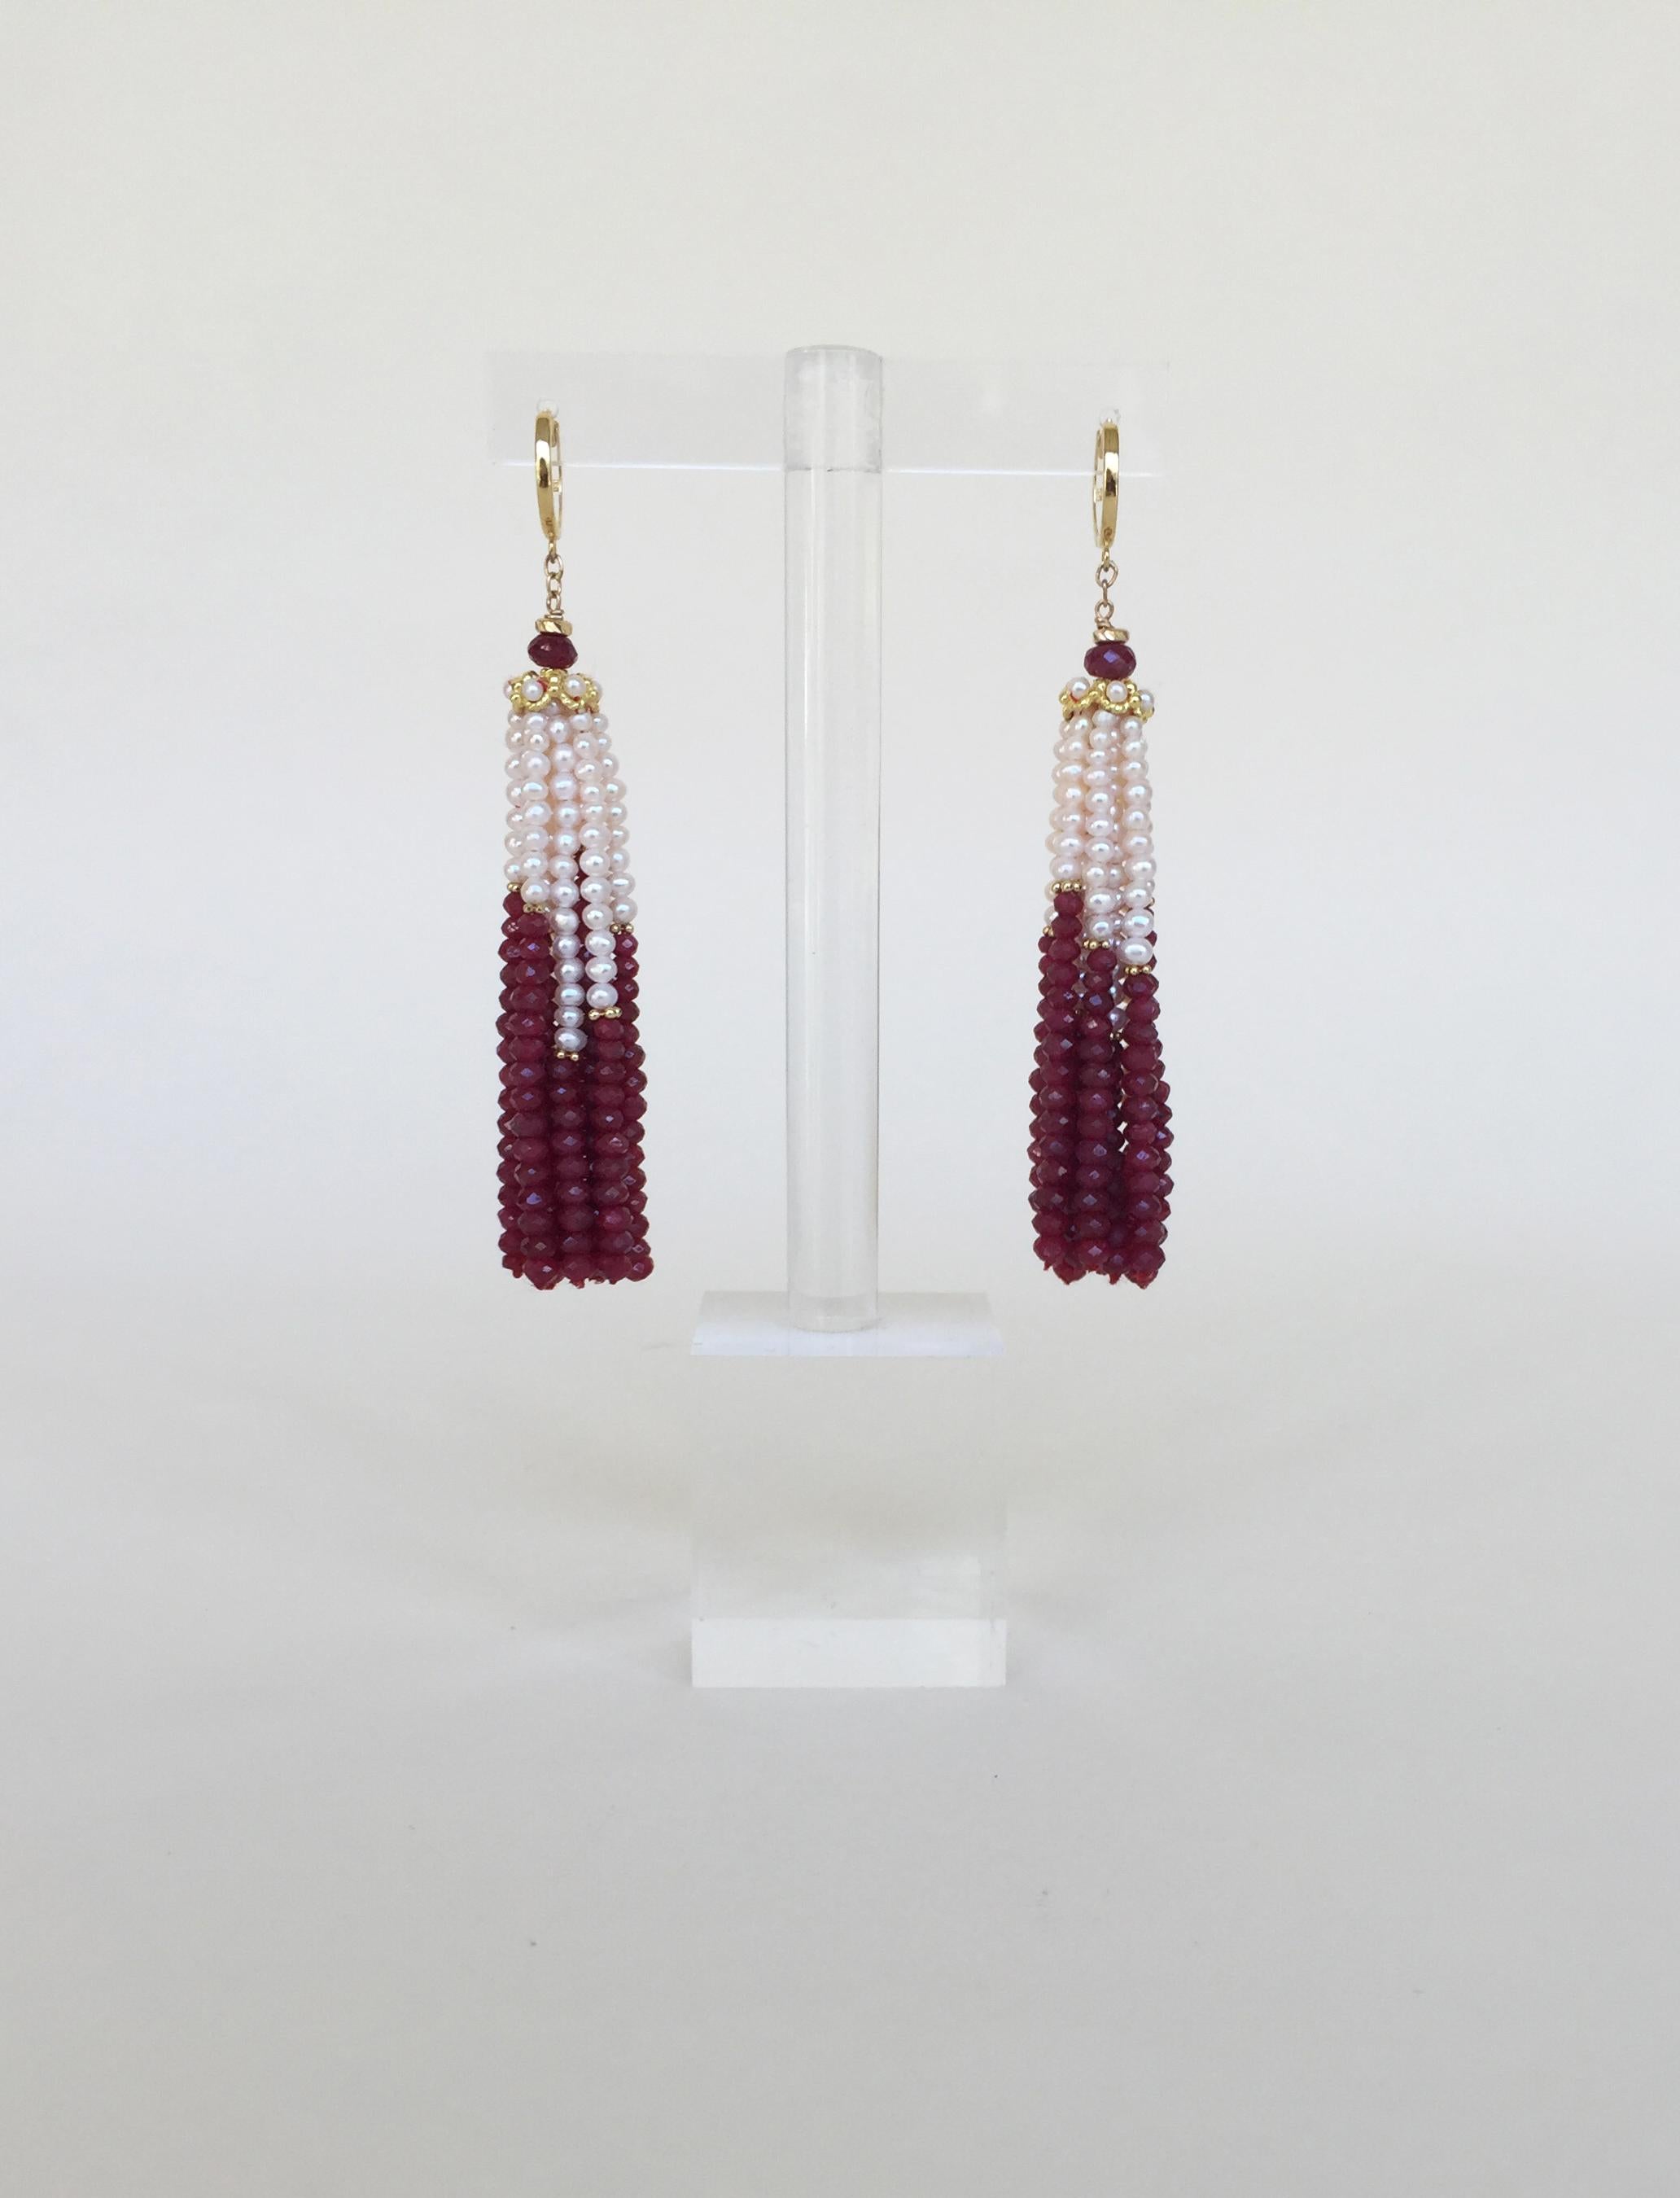 These white pearl and ruby graduated tassel earrings with 14k yellow gold lever backs are gorgeous with glowing white pearls and rich red ruby beads. The tassel starts with white pearls and small 14k yellow gold dividers, and finishing with